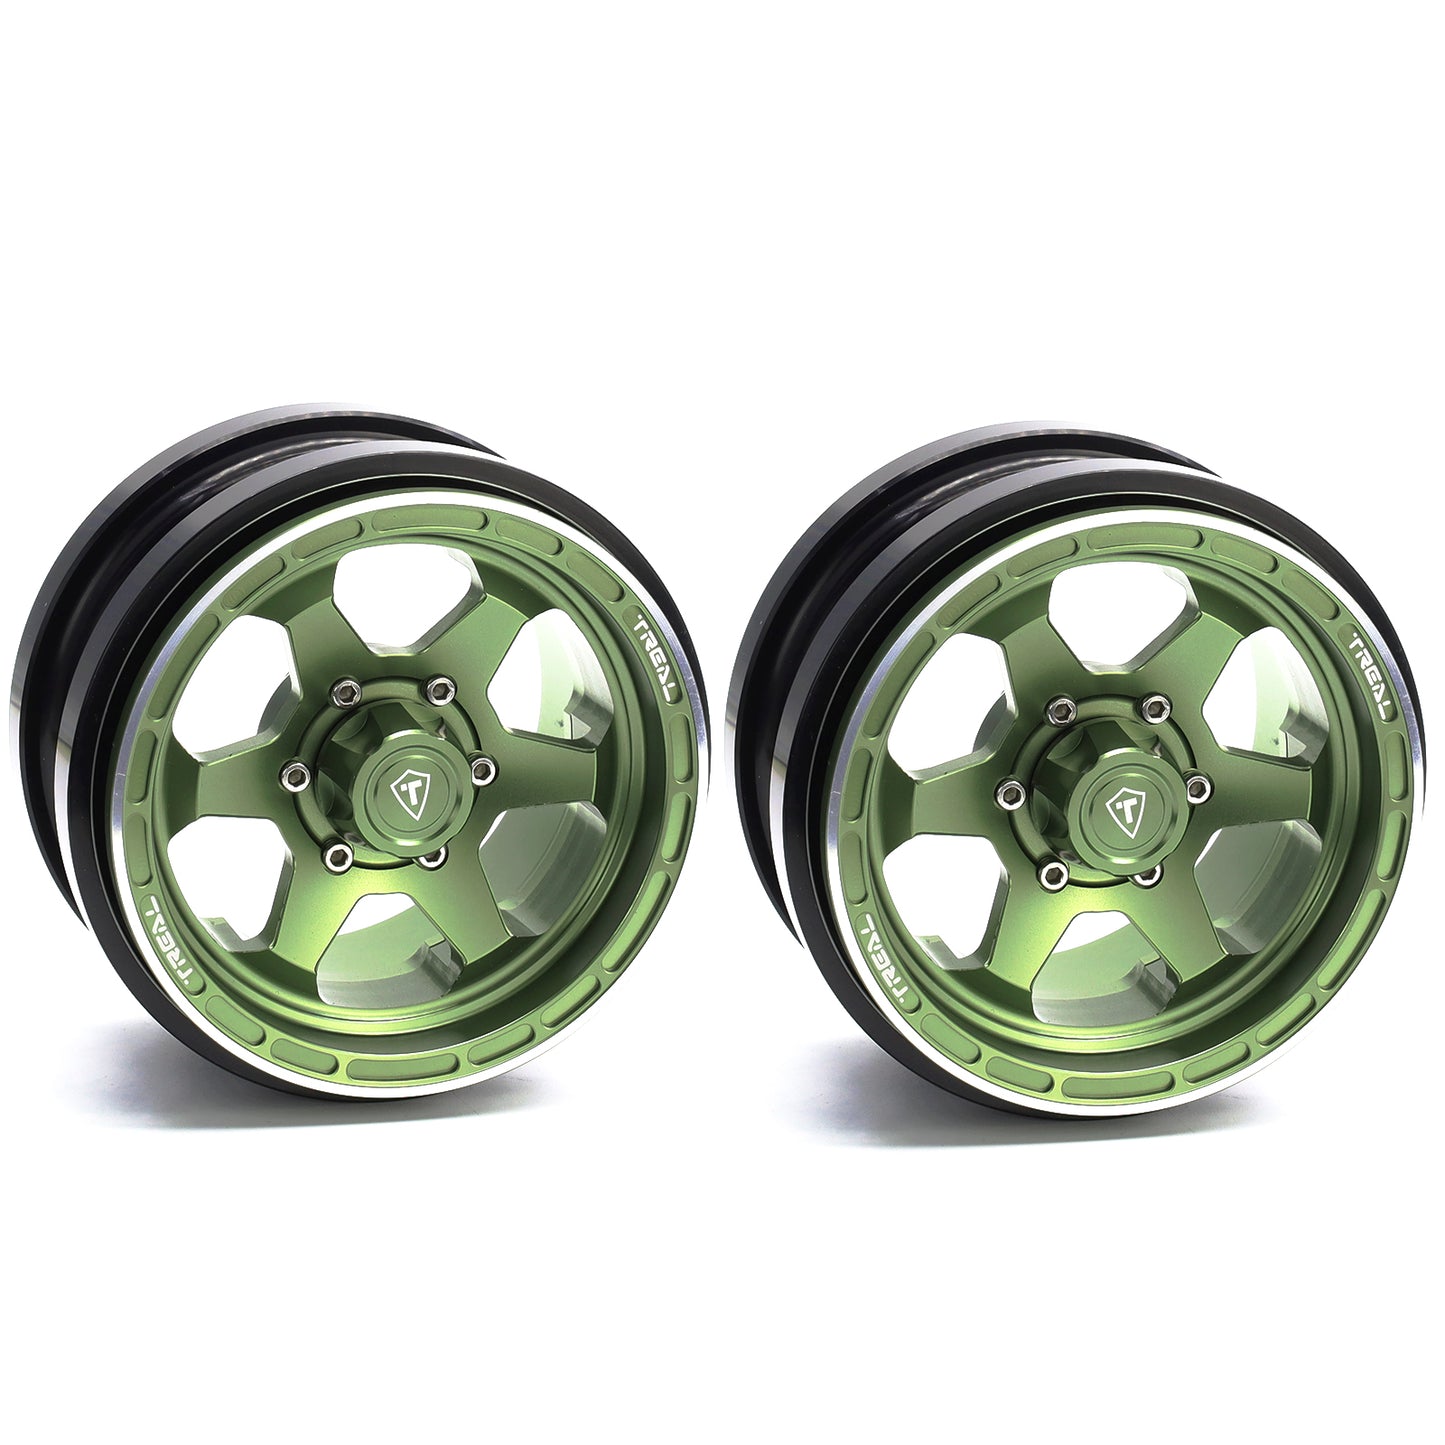 TREAL SCX6 Wheels 2.9'' Beadlock Wheels (2) CNC Machined SCX6 Upgrades Parts for Axial SCX6-Type A